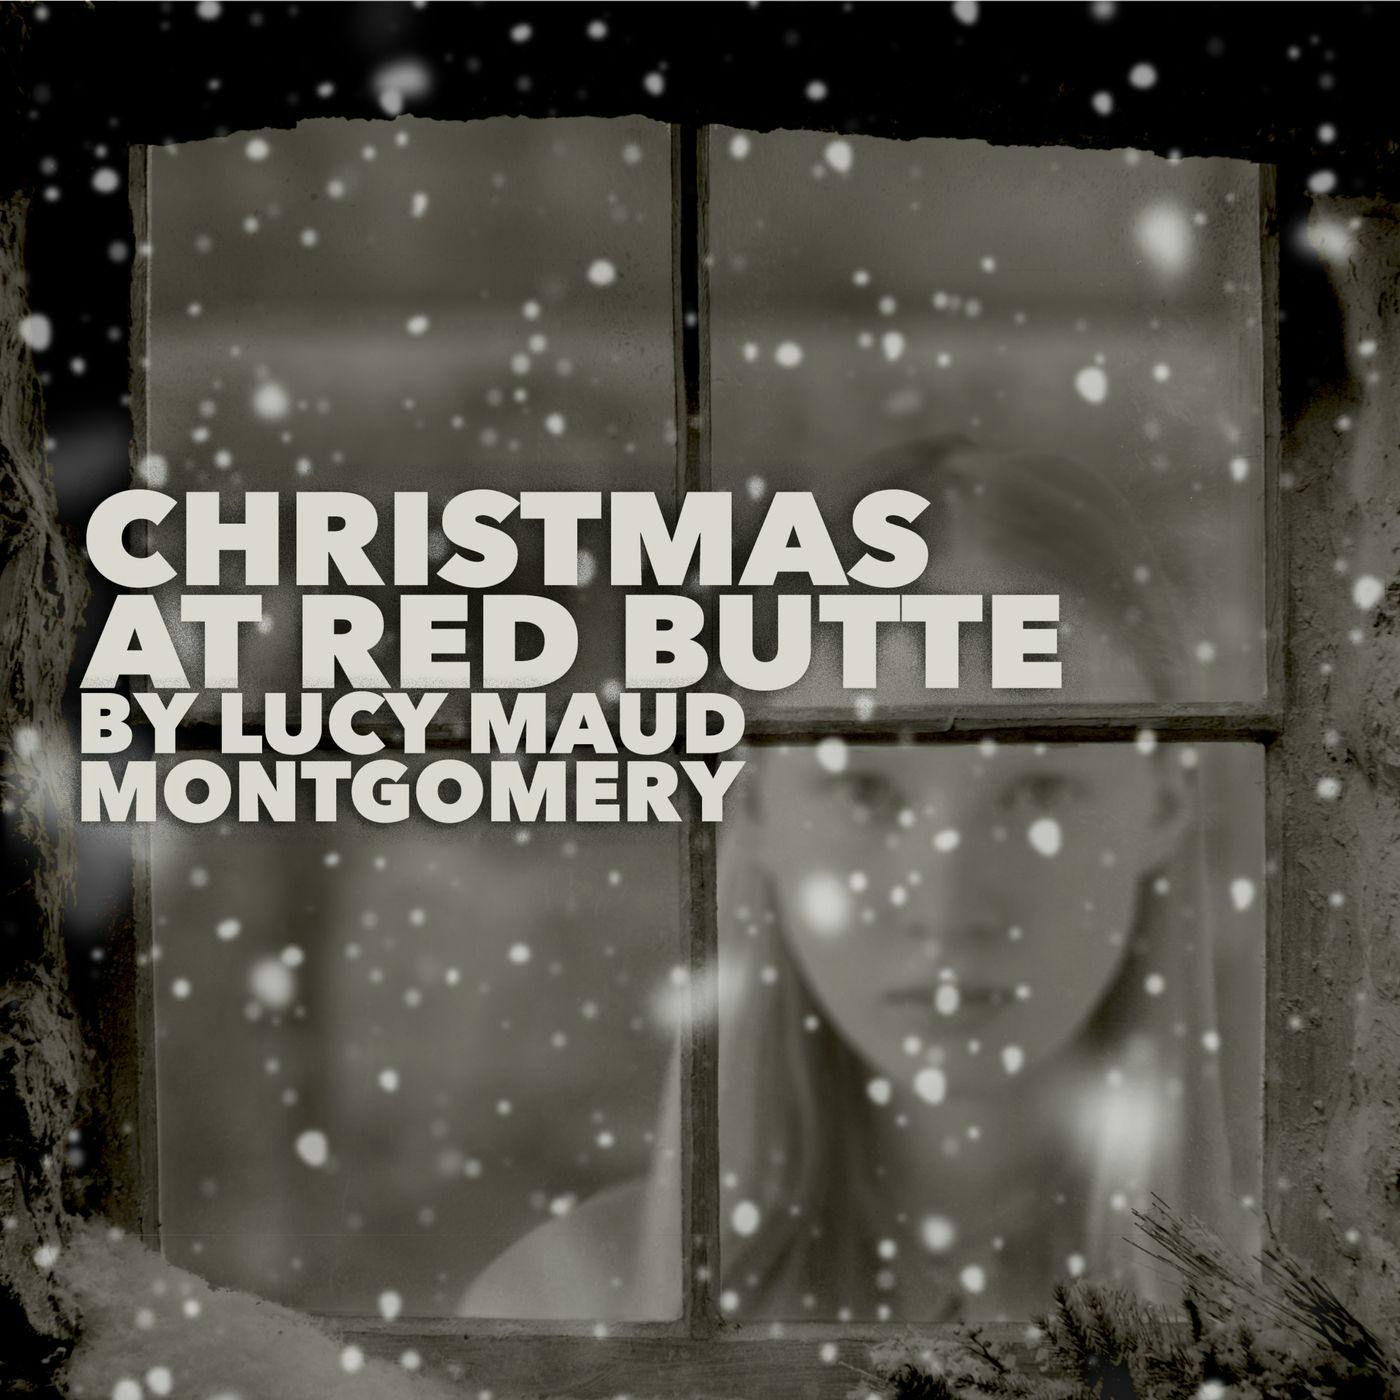 Christmas at Red Butte by Lucy Maud Montgomery - A Classic Christmas Story